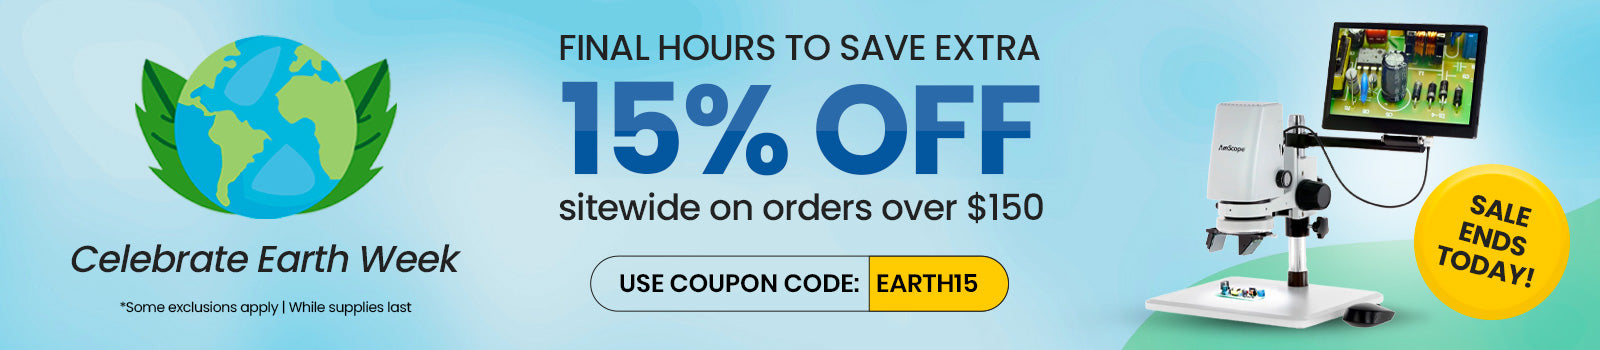 Am Scope - Enjoy 40% Off Open Box Products Today!